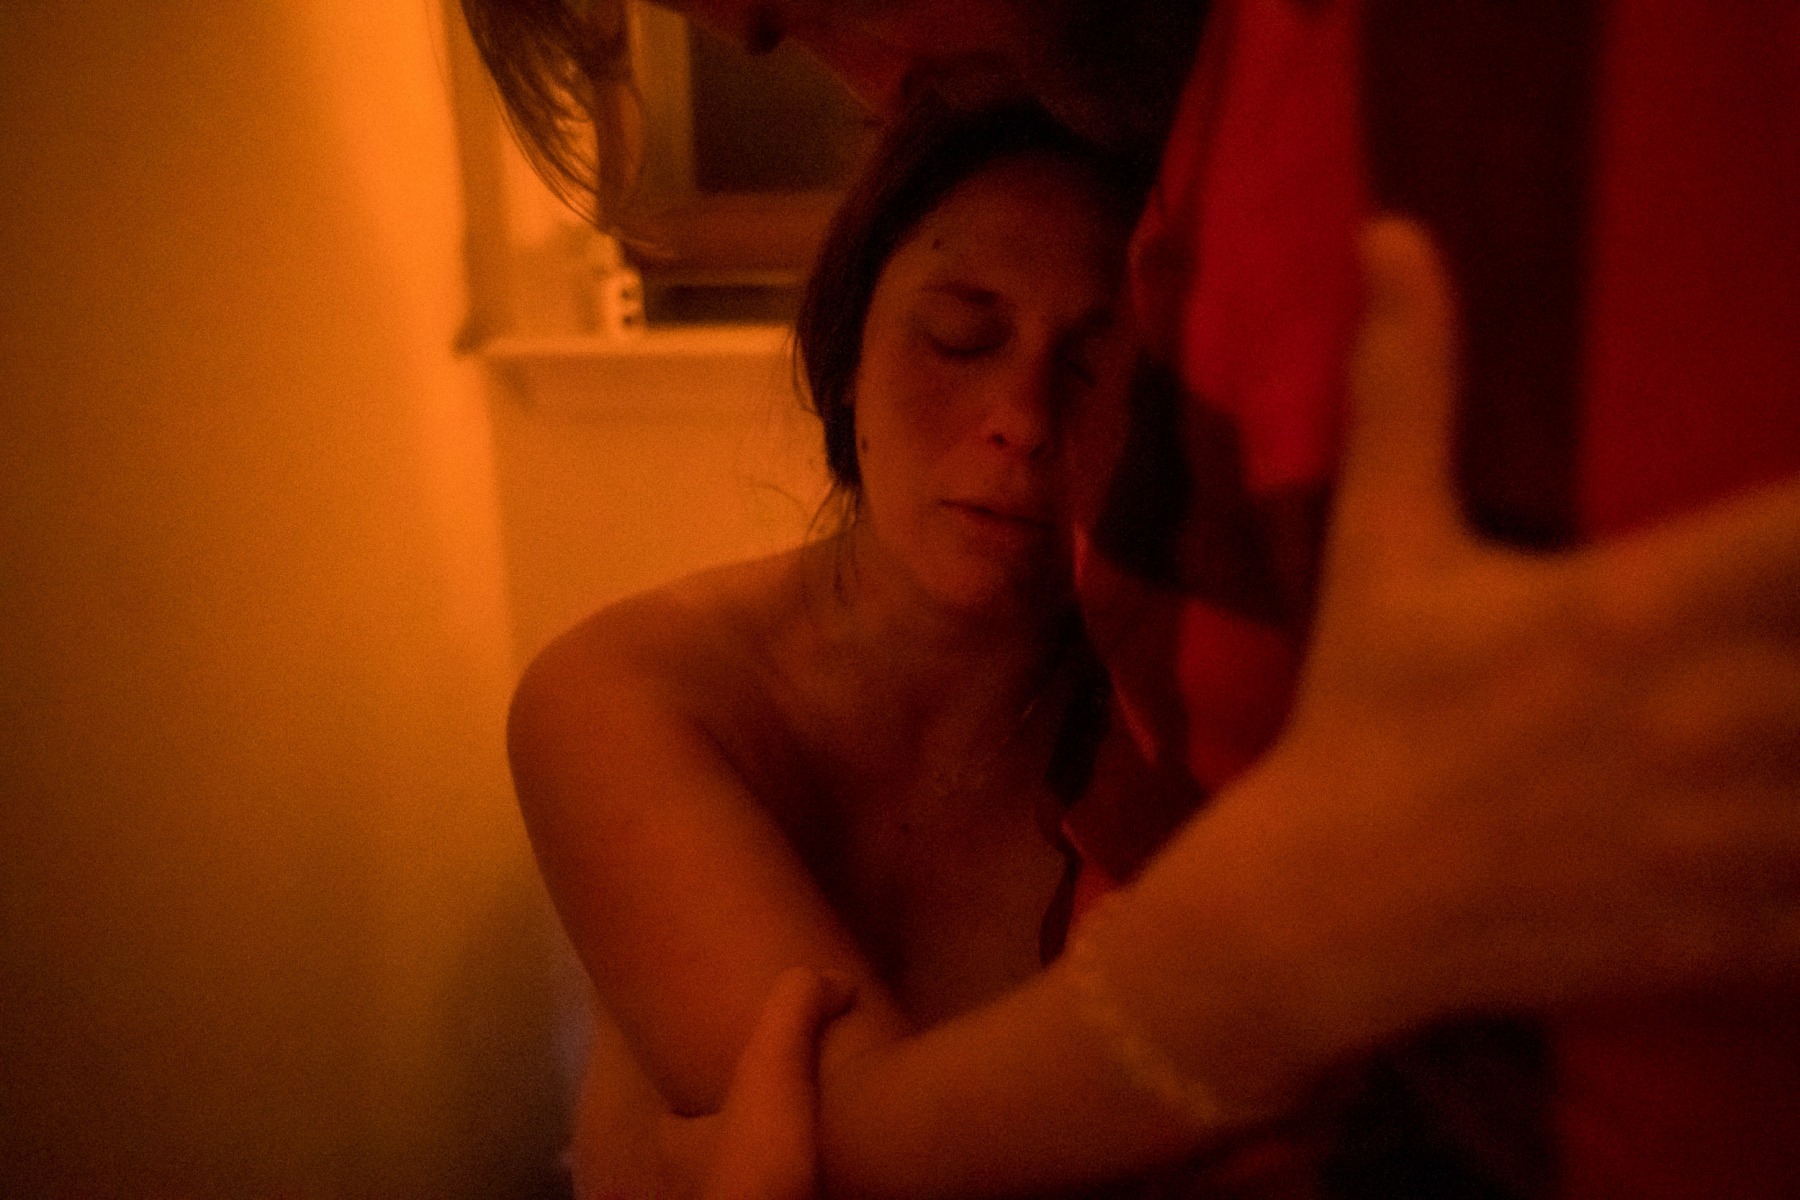 10:05pm: Just after getting out of the birthing pool, Kate labors while sitting on the toilet in her bathroom.